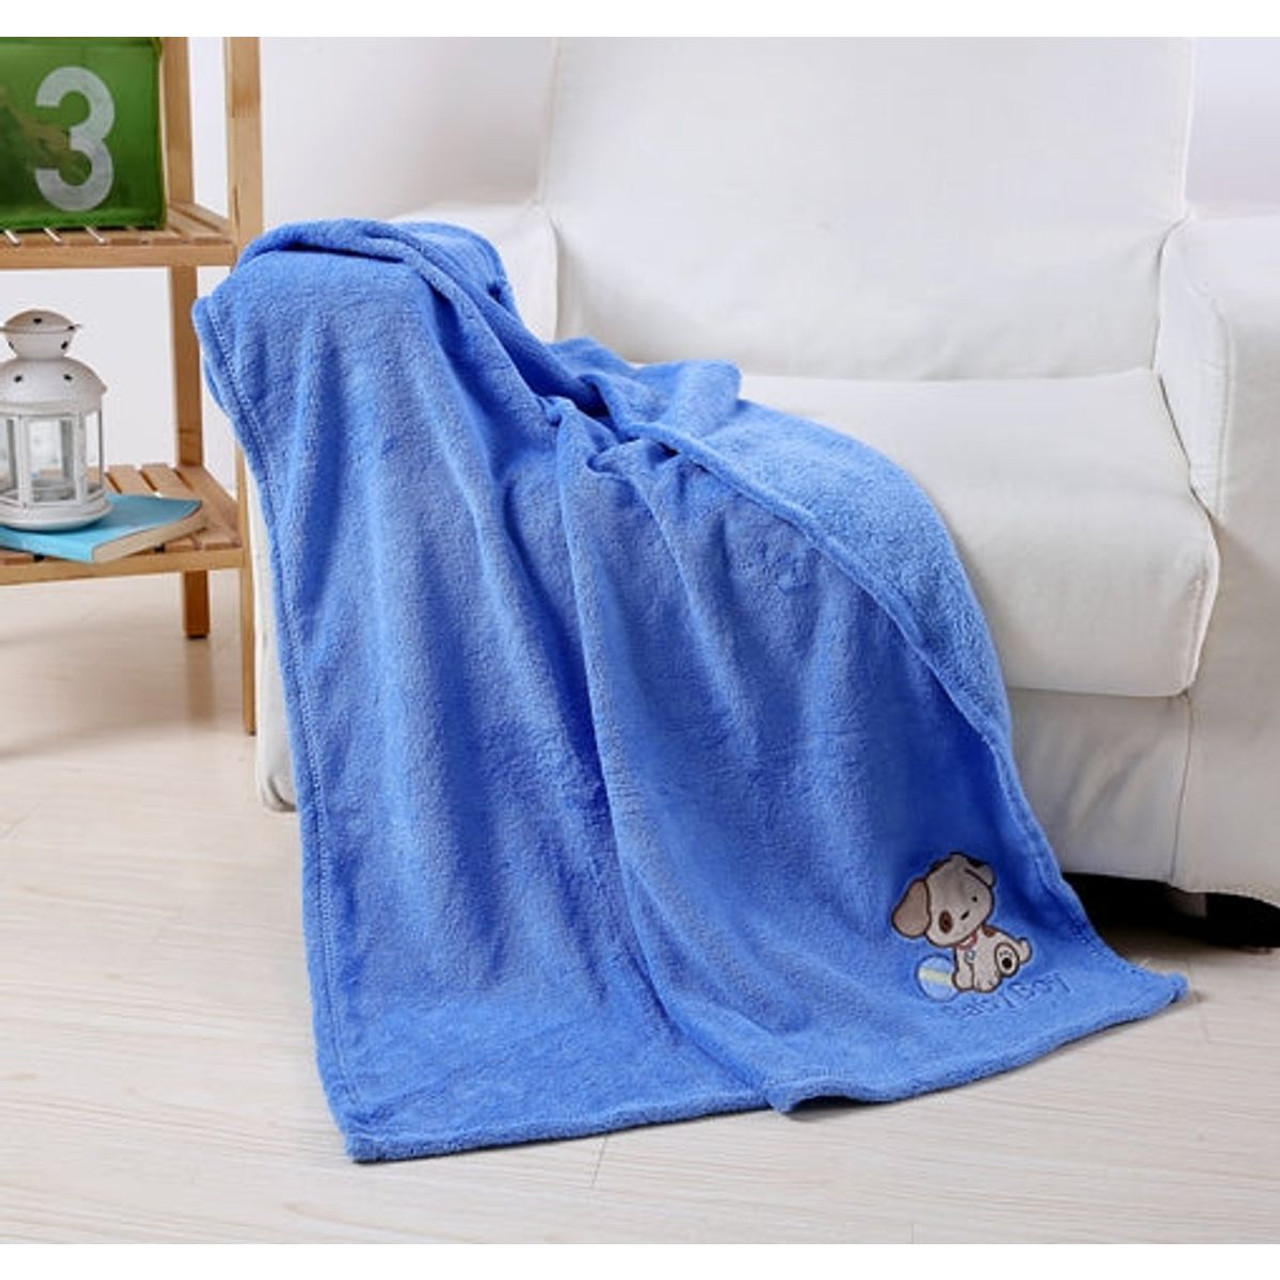 Baby & Toddler Blanket product image